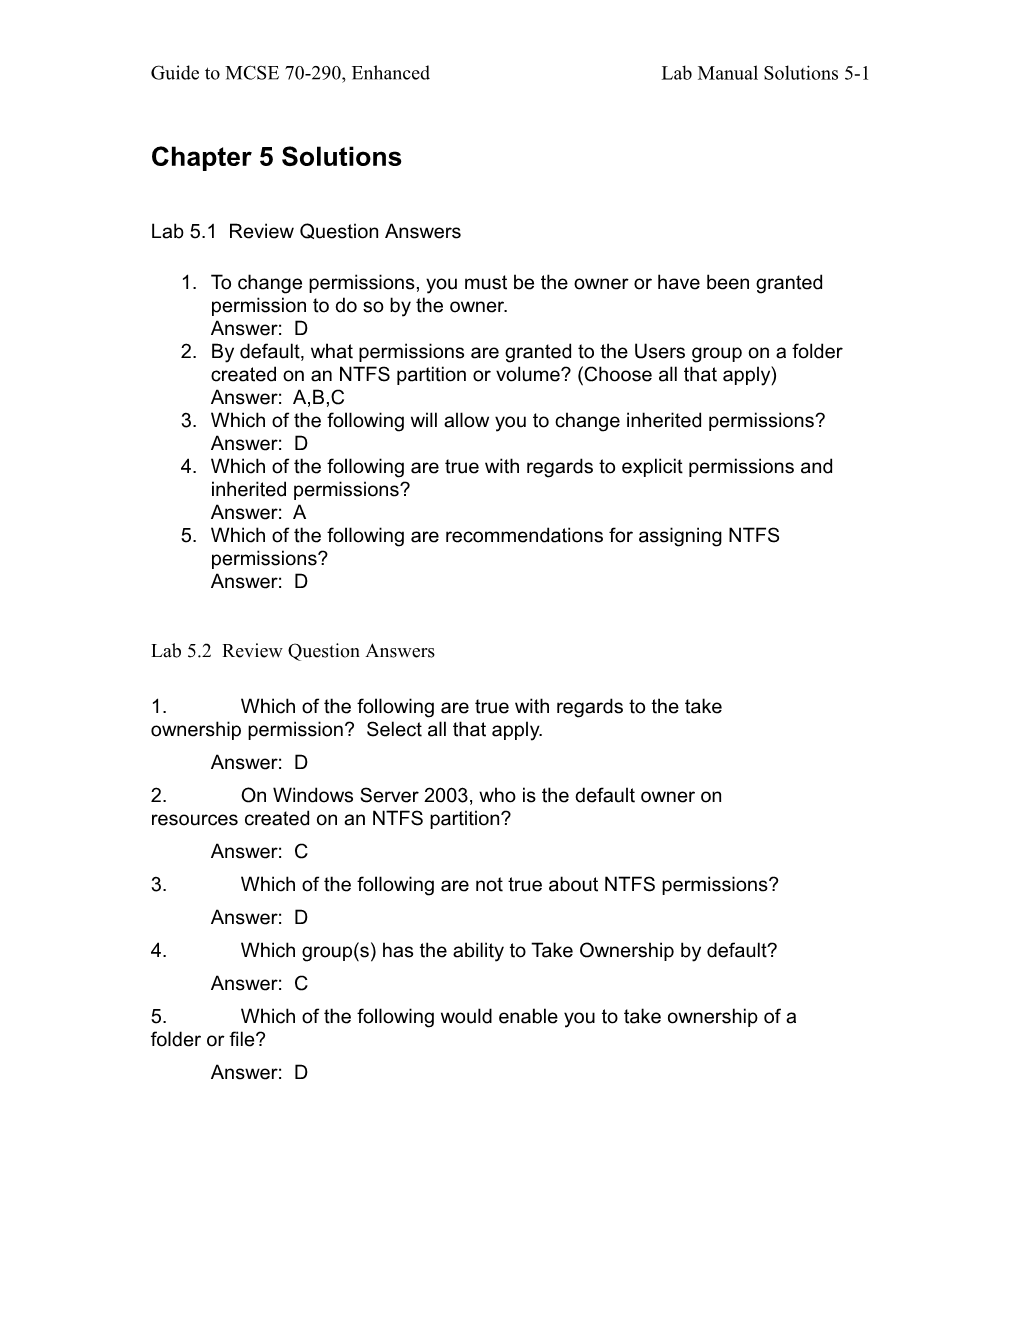 Chapter 5 Review Question Answers